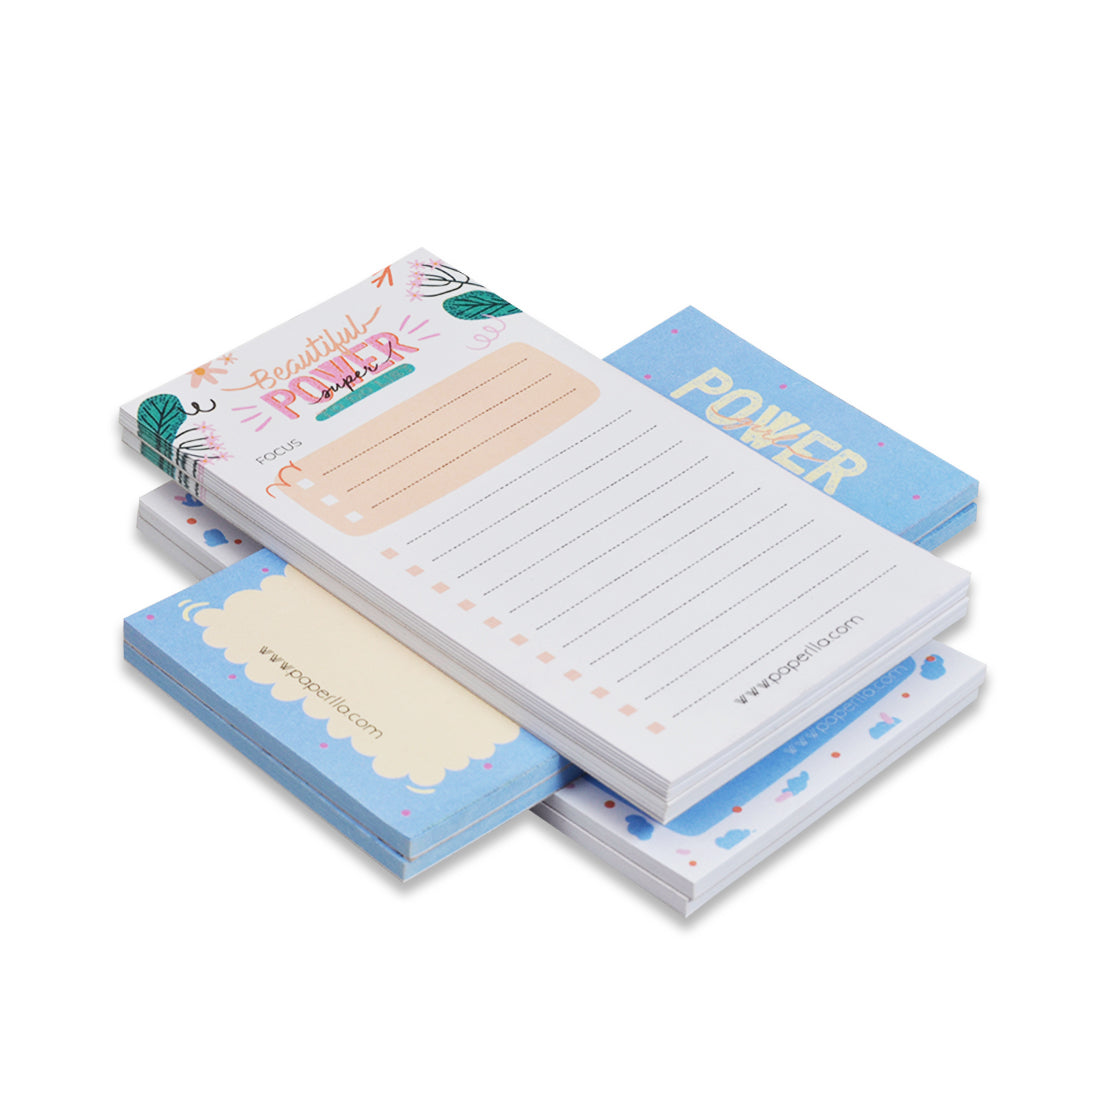 To Do List Notepad - 50 Pages Each Tear-Off Daily Planner Undated Planning Sheets, Day Checklist Productivity Organizer, Track Your Goals, Ideas, Daily Schedule Note Pad Set of 6